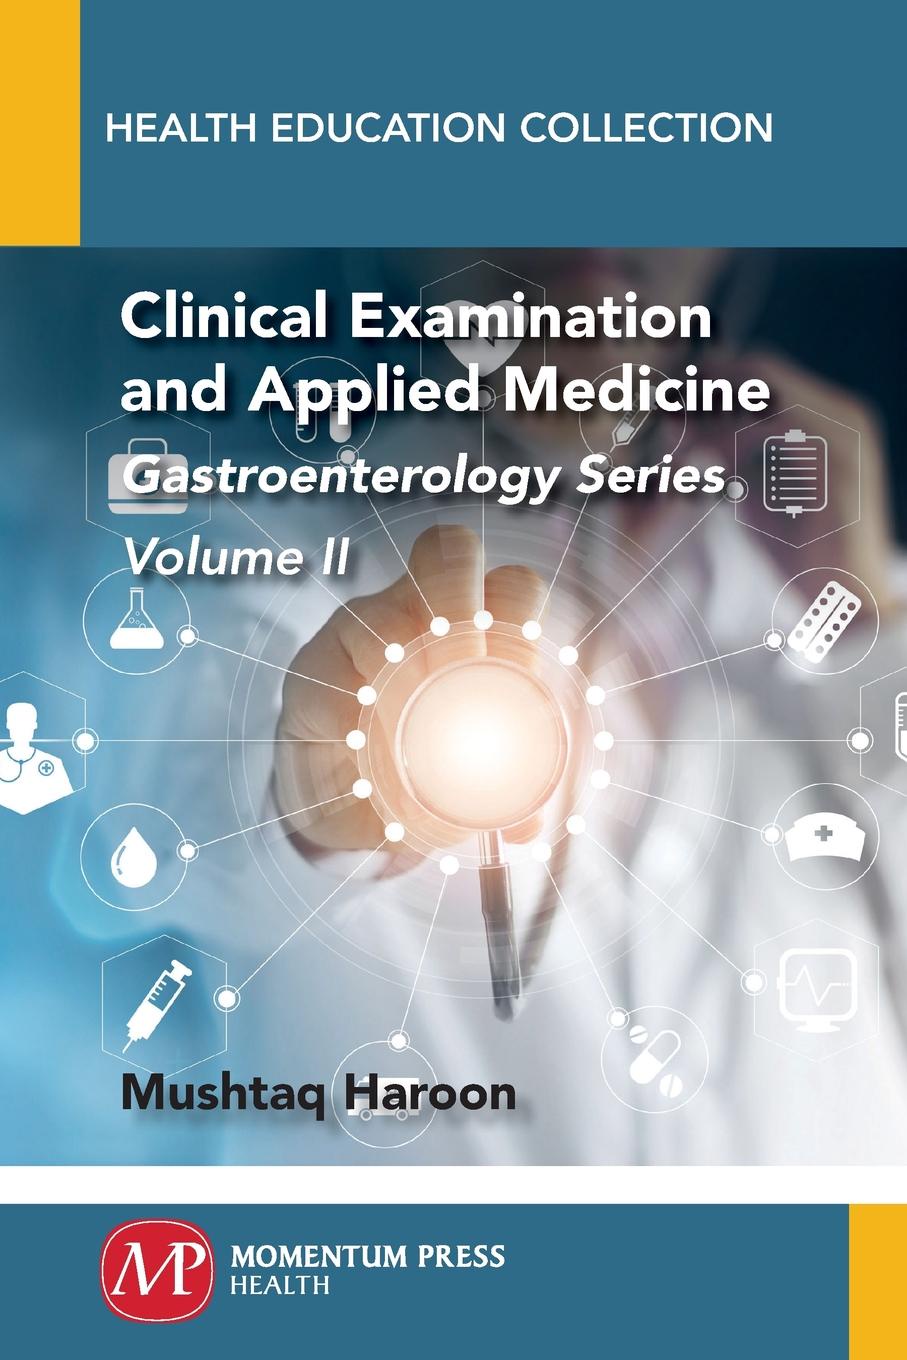 Clinical Examination and Applied Medicine, Volume II. Gastroenterology Series